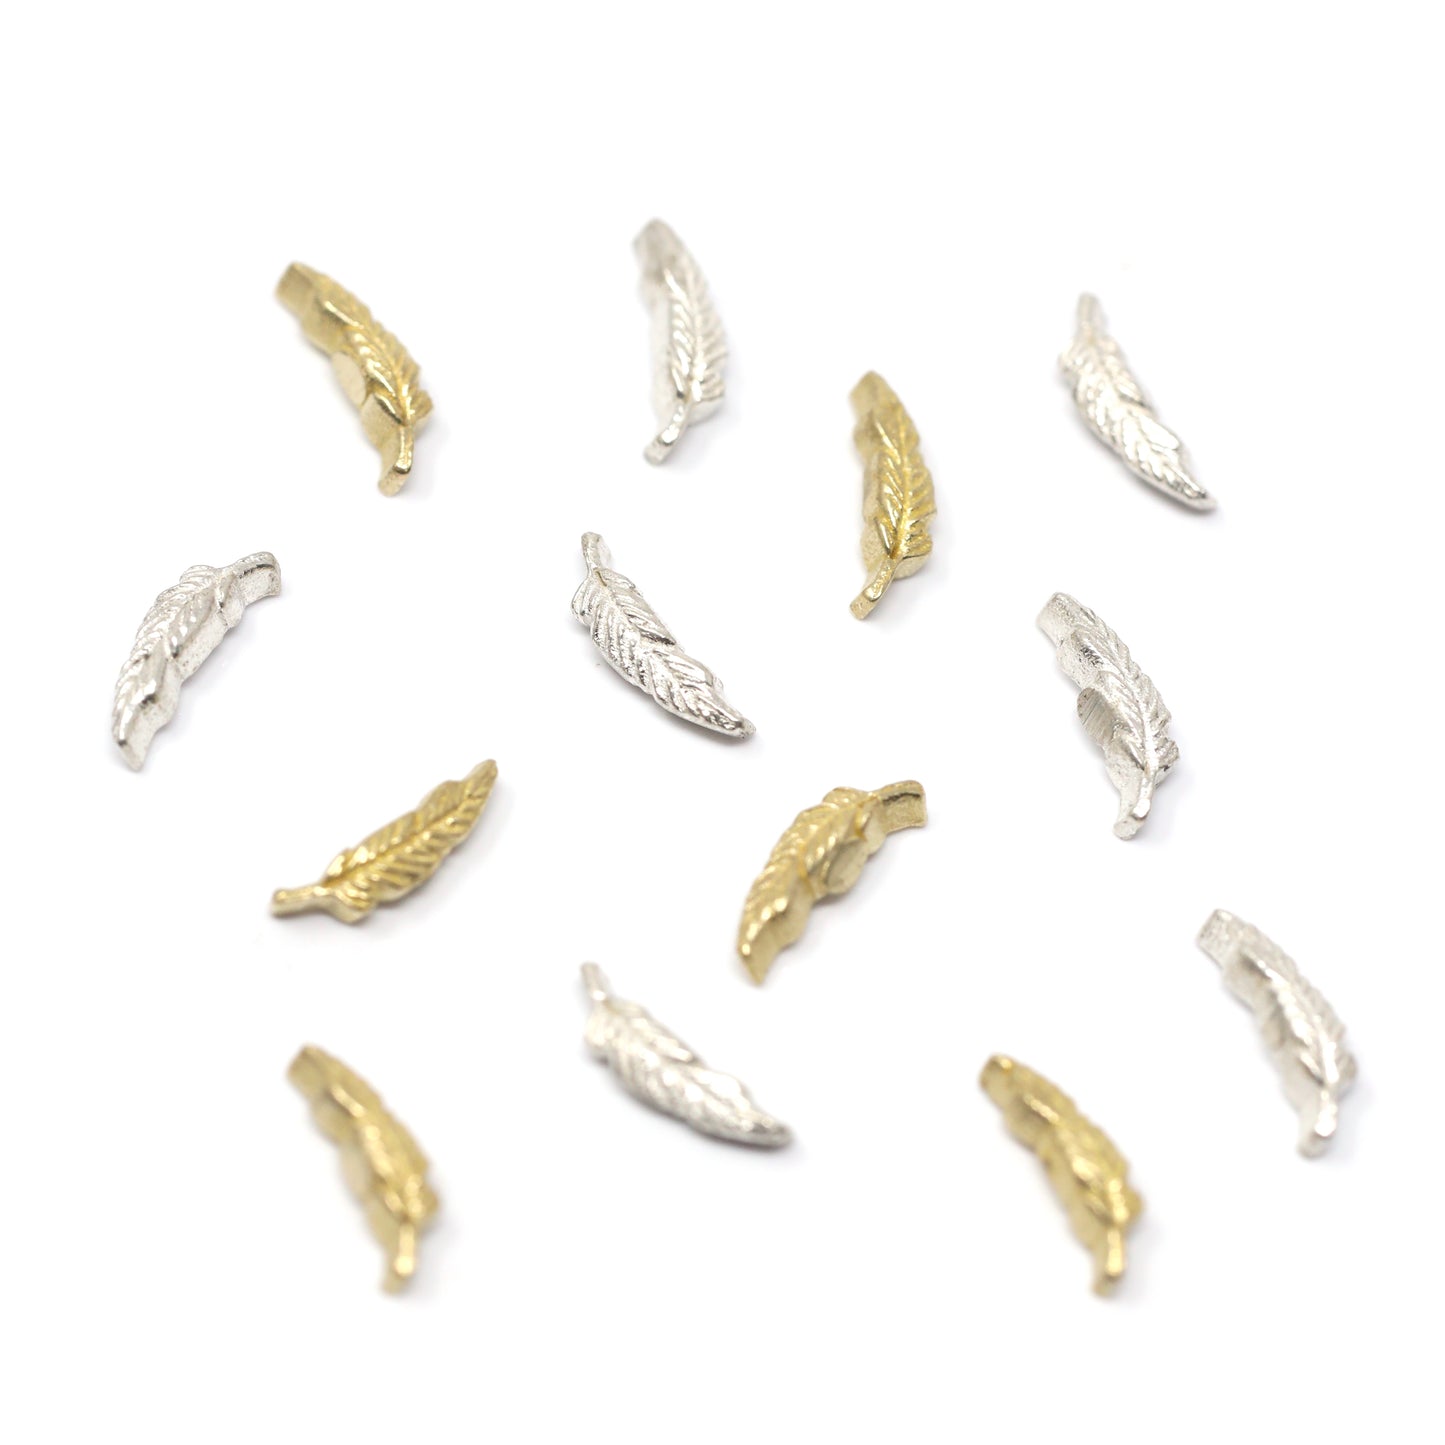 Feather Accent Charm Embellishments for Soldering or Jewelry Making